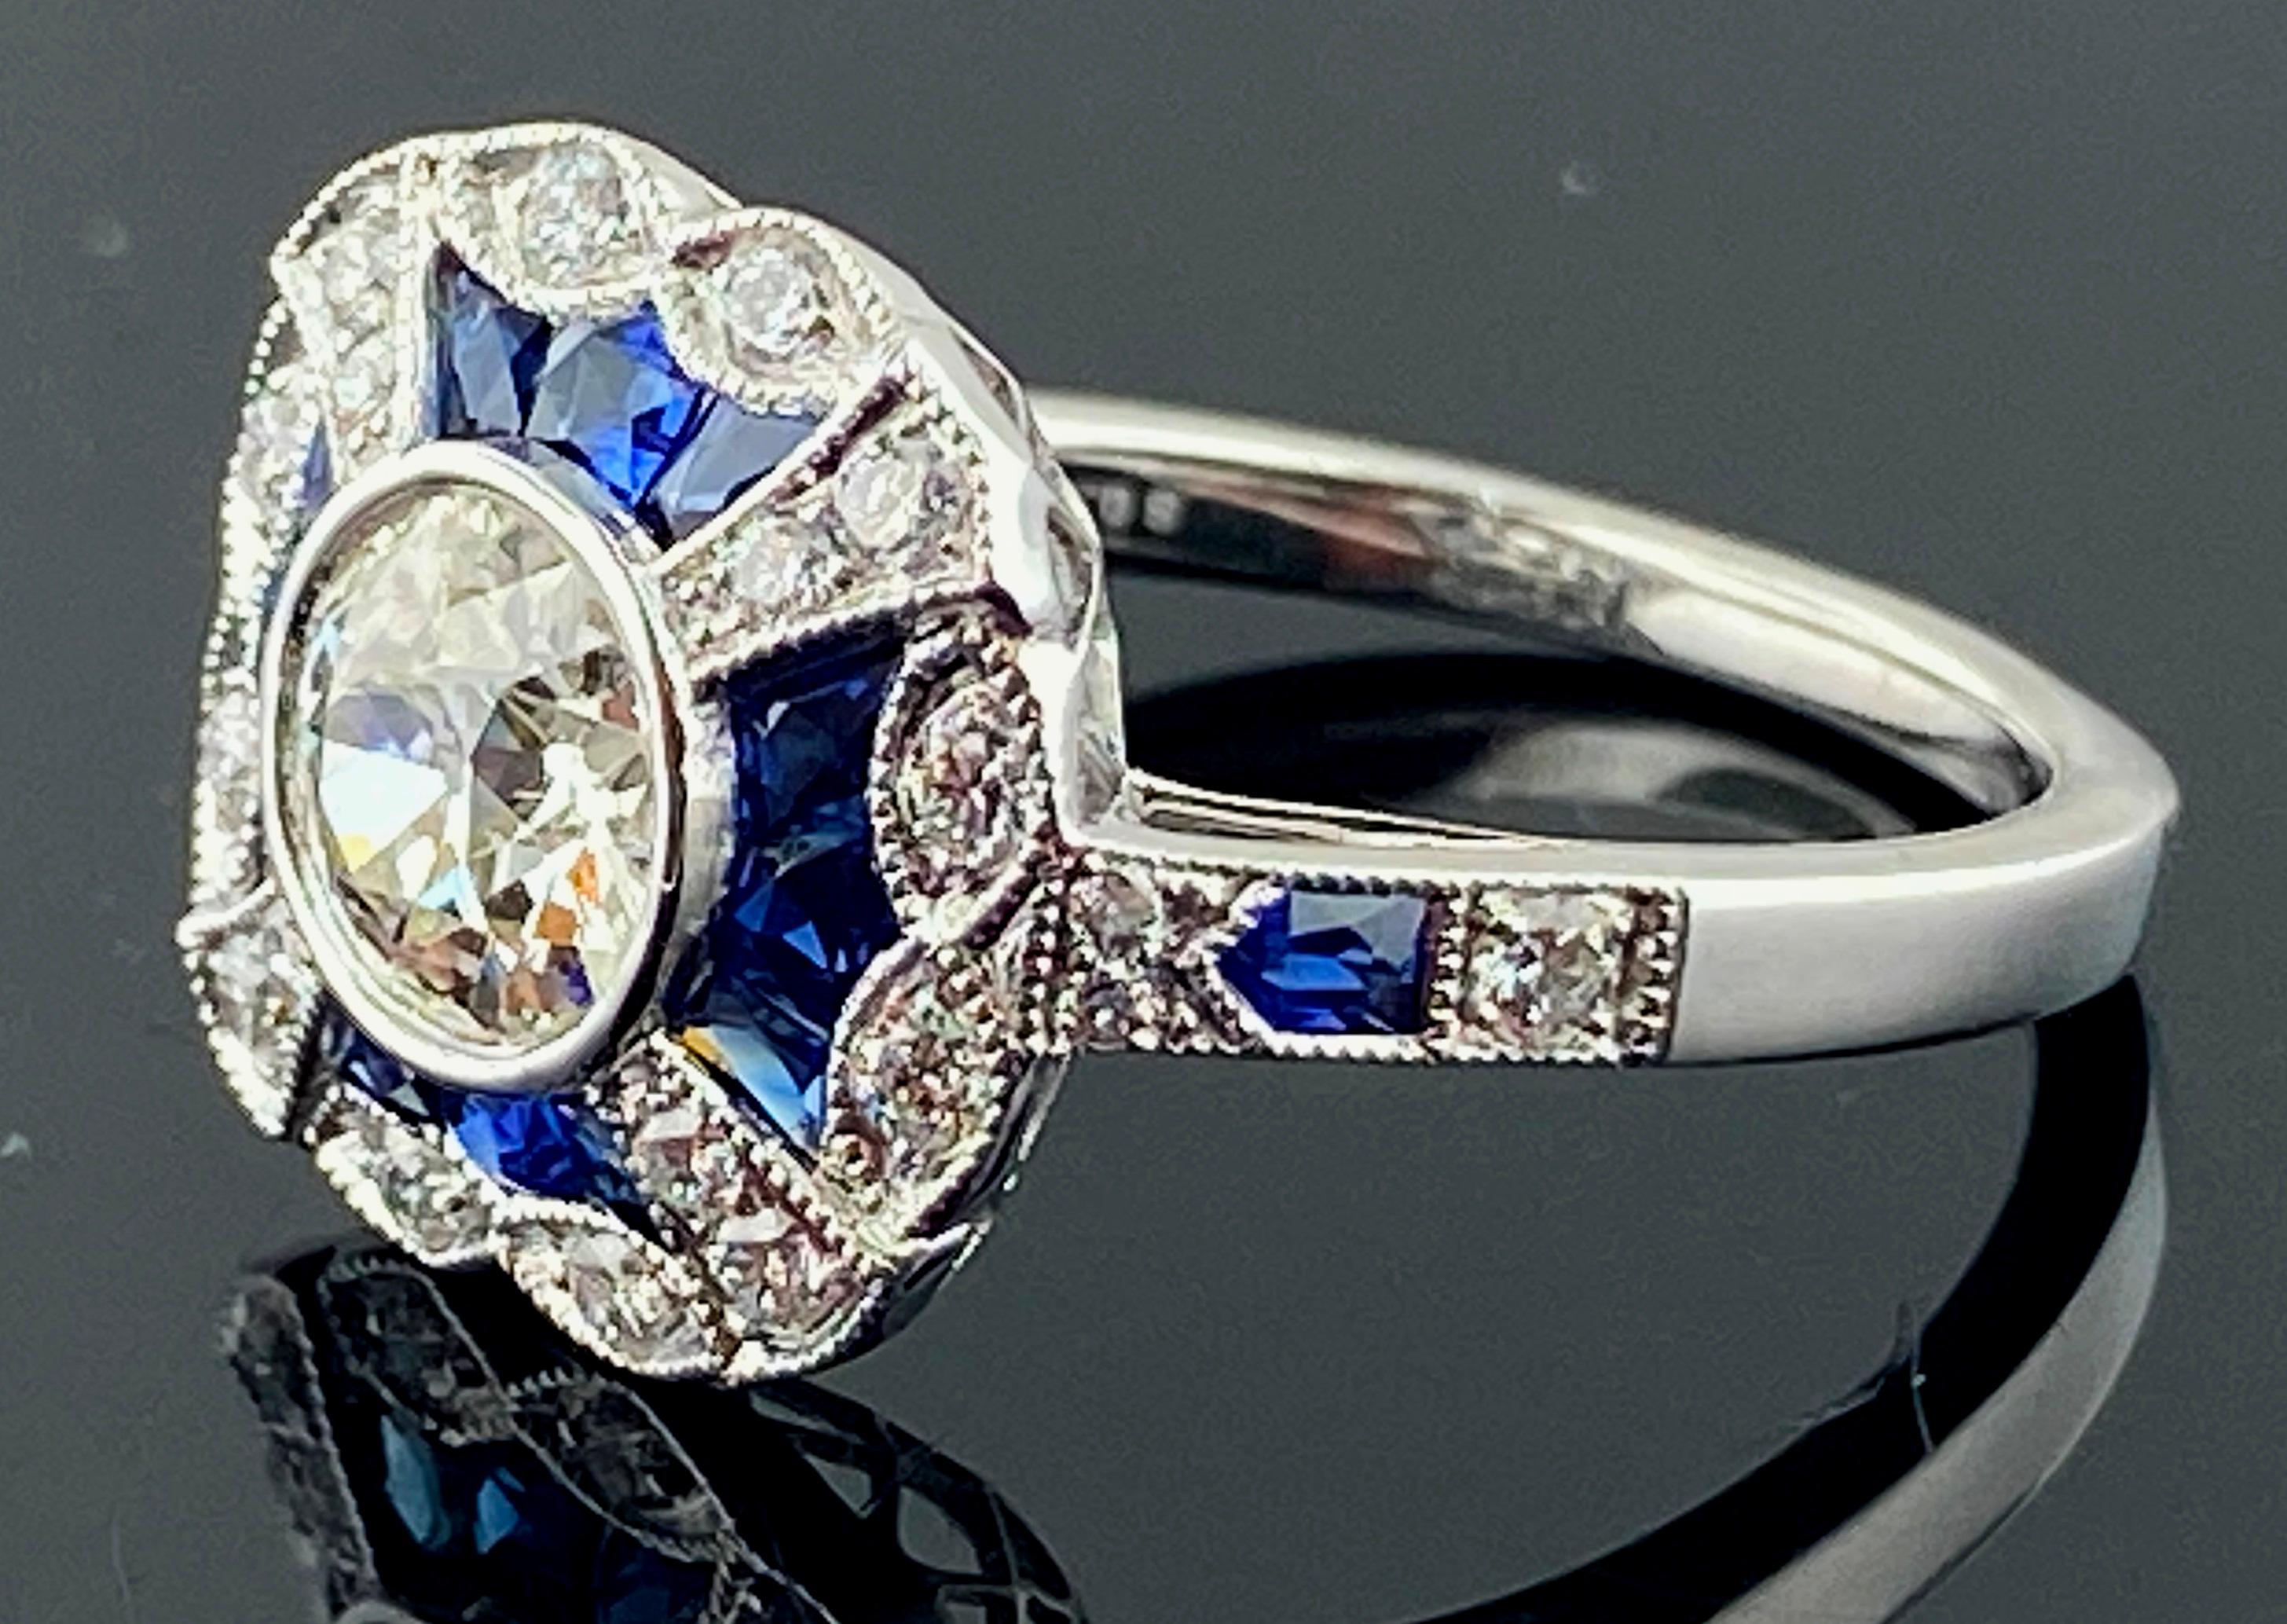 Set in Platinum, weighing 4.53 grams, is an 0.75 carat Old European Cut center Diamond, Color: H-I, Clarity: VS-2,  Surrounding the diamond are 14 Fancy Calibre Cut Blue Sapphires weighing 0.71 carats and 22 Full Cut Round Brilliant Cut Diamonds